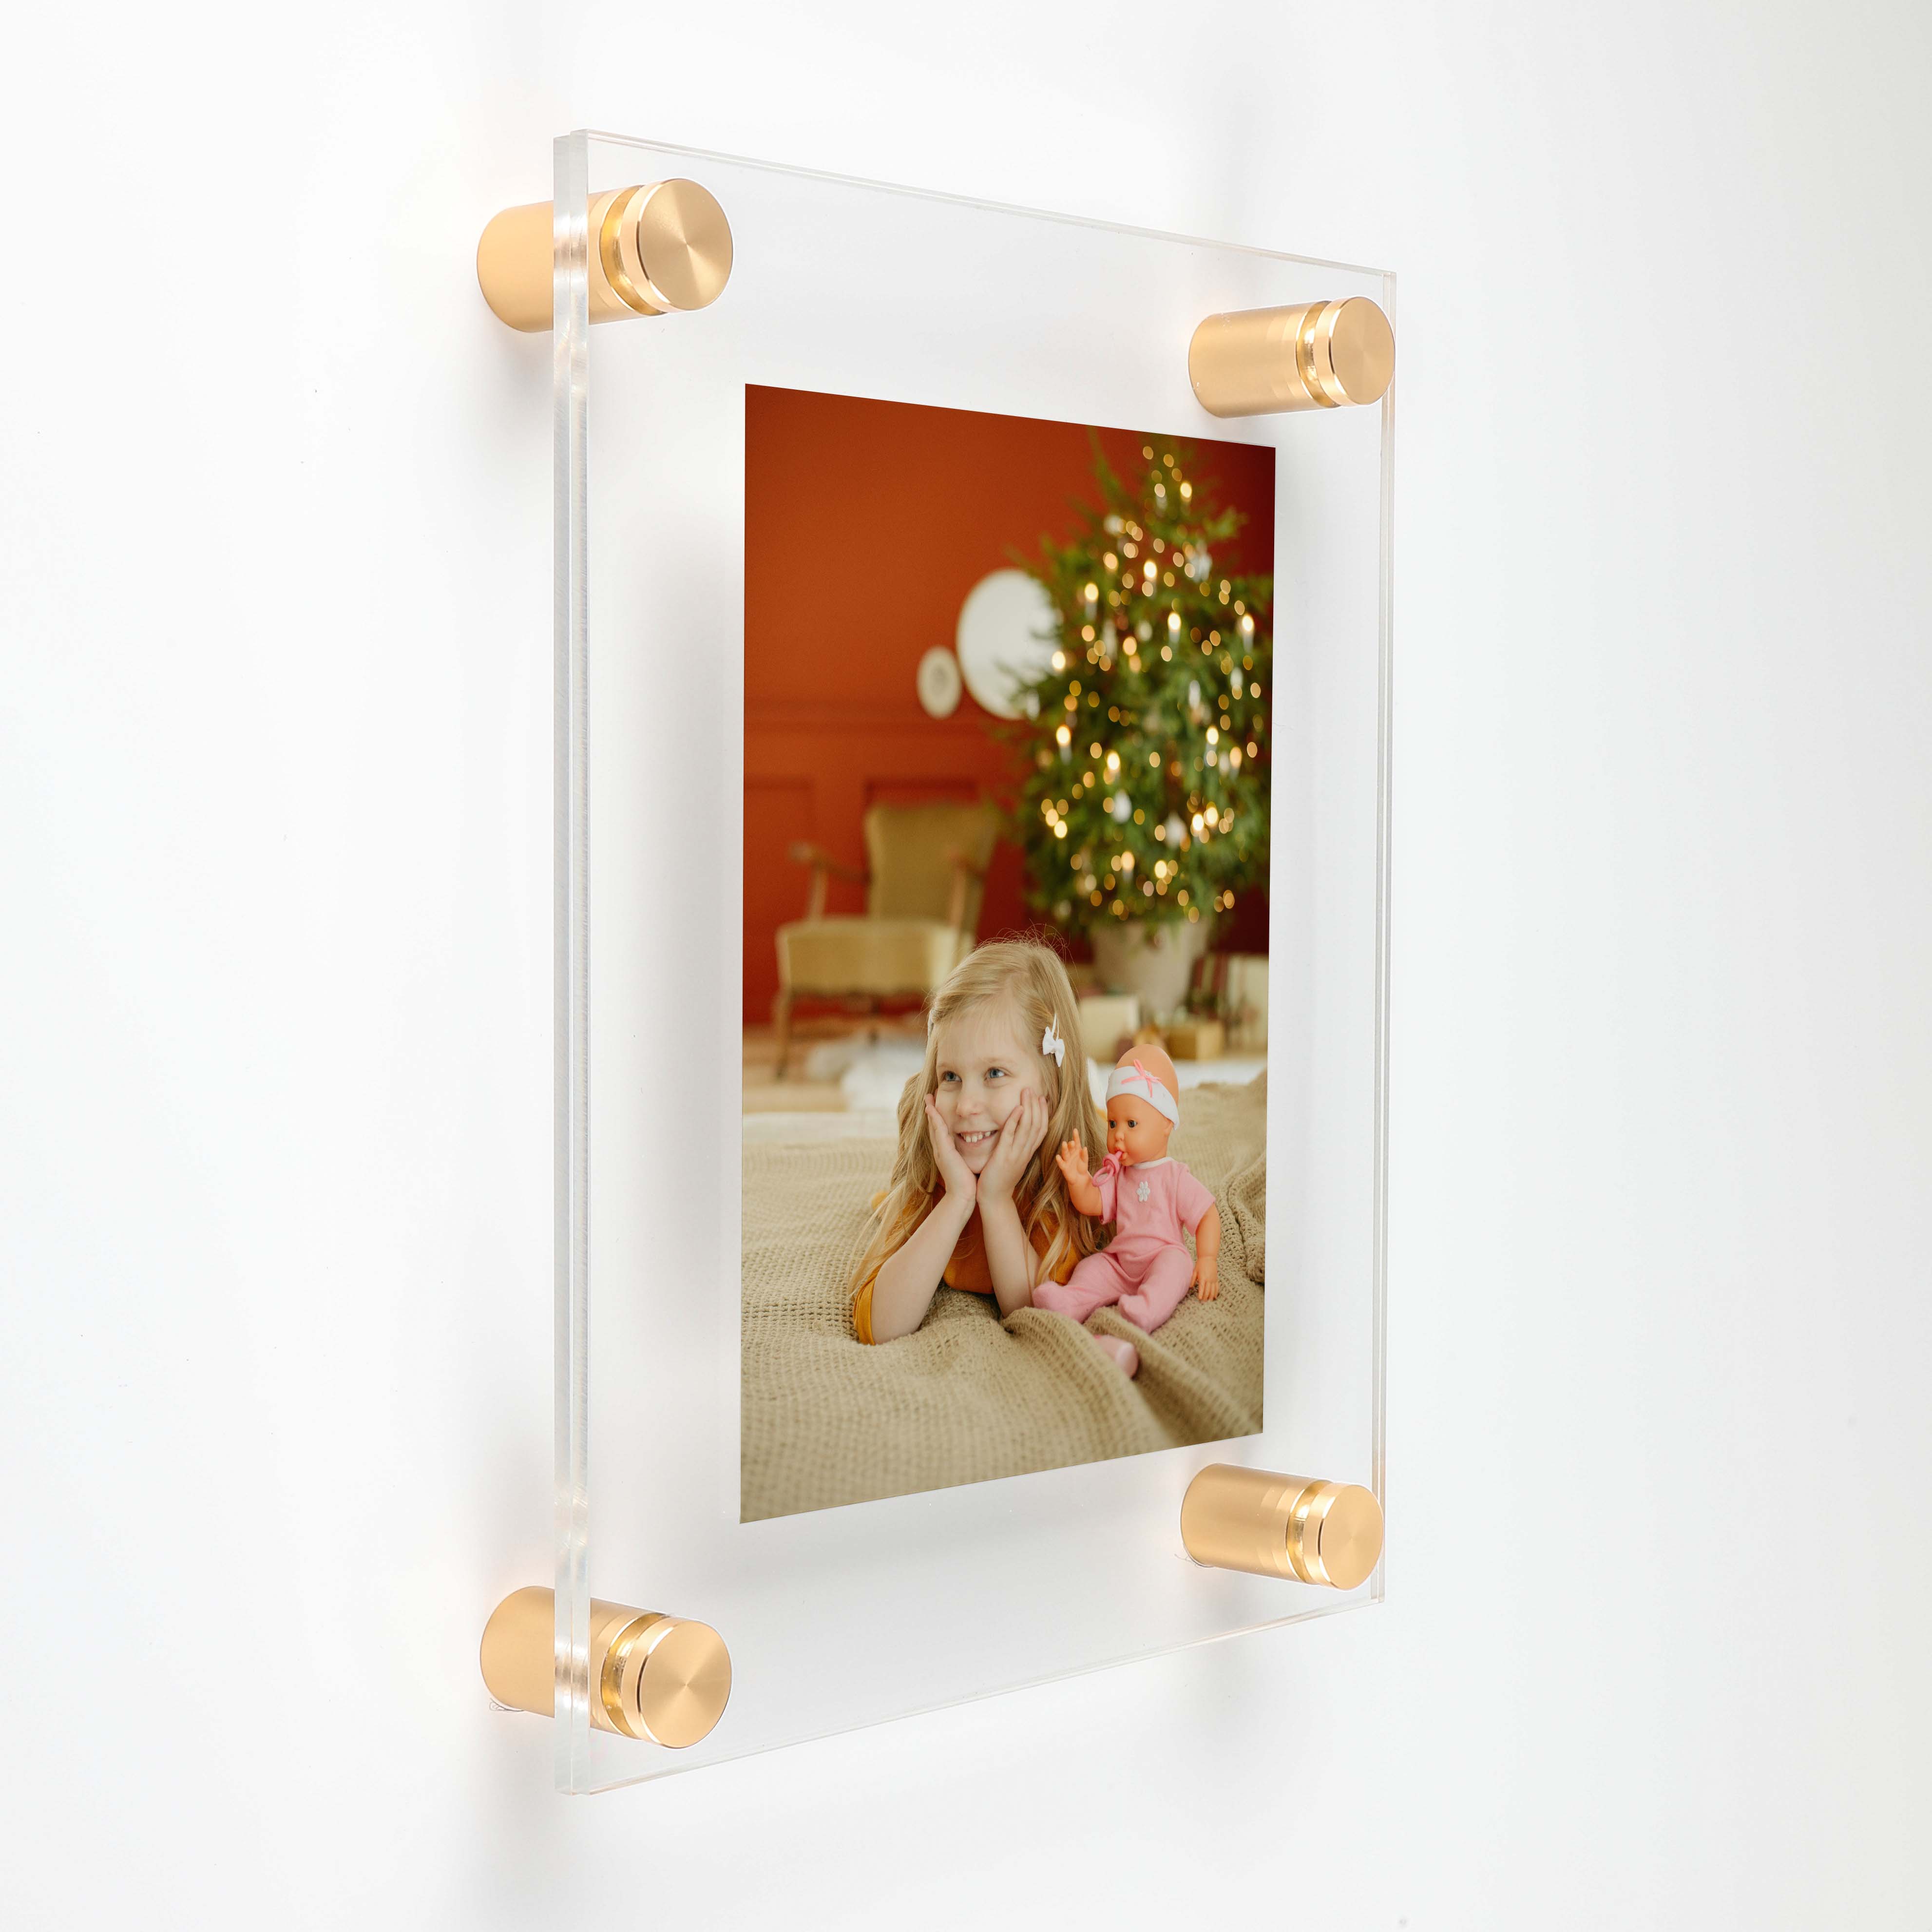 (2) 19-3/4'' x 26'' Clear Acrylics , Pre-Drilled With Polished Edges (Thick 3/16'' each), Wall Frame with (4) 5/8'' x 3/4'' Champagne Anodized Aluminum Standoffs includes Screws and Anchors